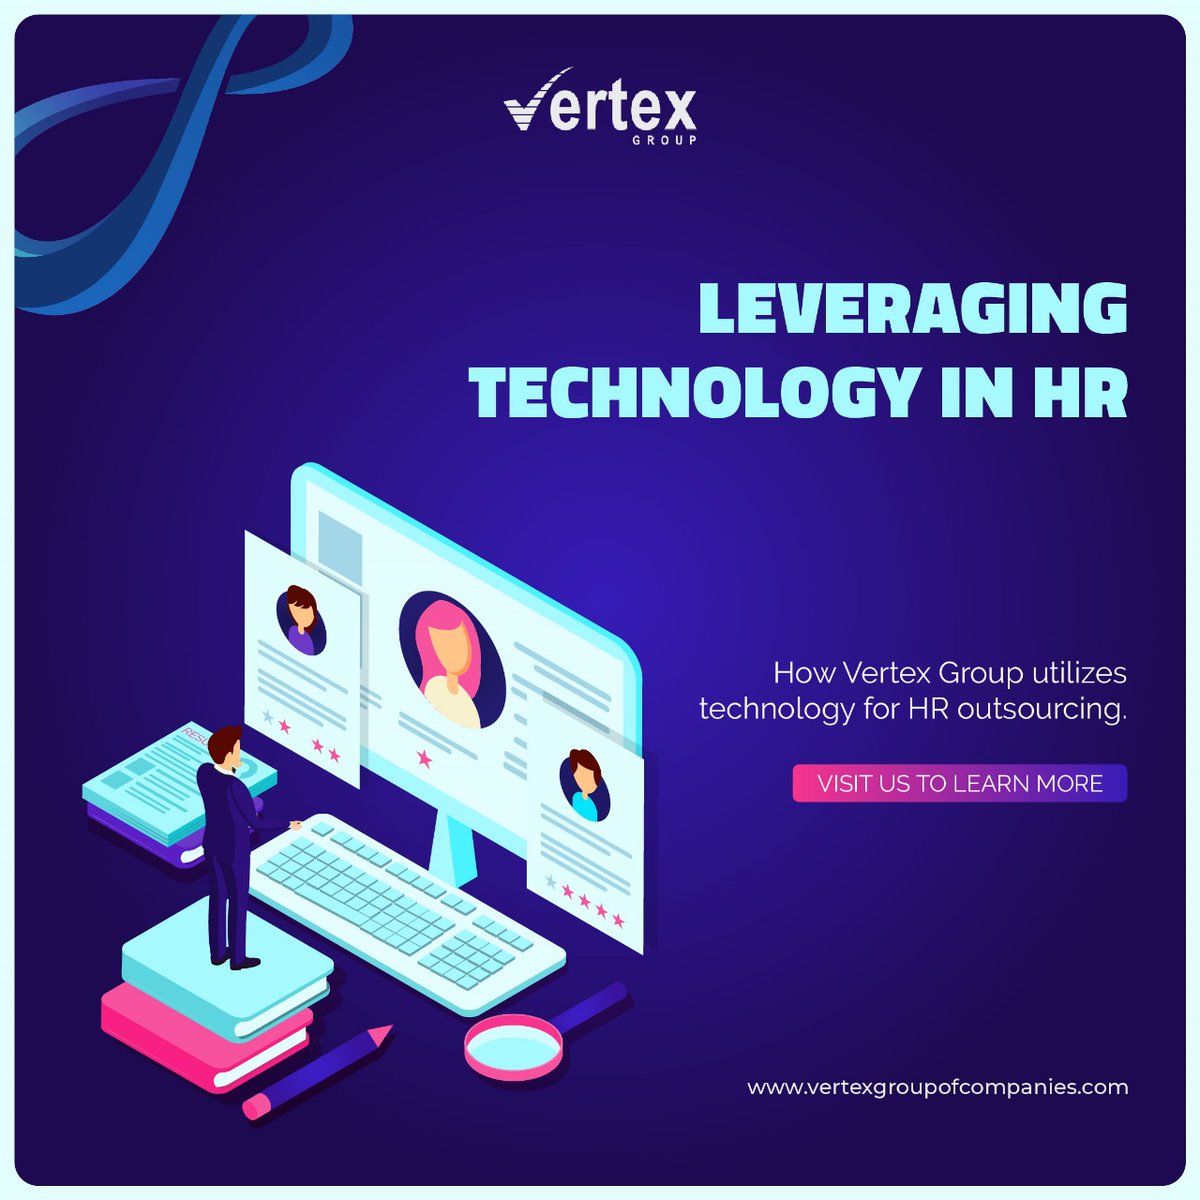 Discover the future of HR outsourcing with Vertex Group. We leverage cutting-edge technology to redefine and elevate your HR processes. 

#HRTech #VertexGroup #InnovationInHR #WorkforceTechnology #TechDrivenHR #EfficientHR #FutureOfWork